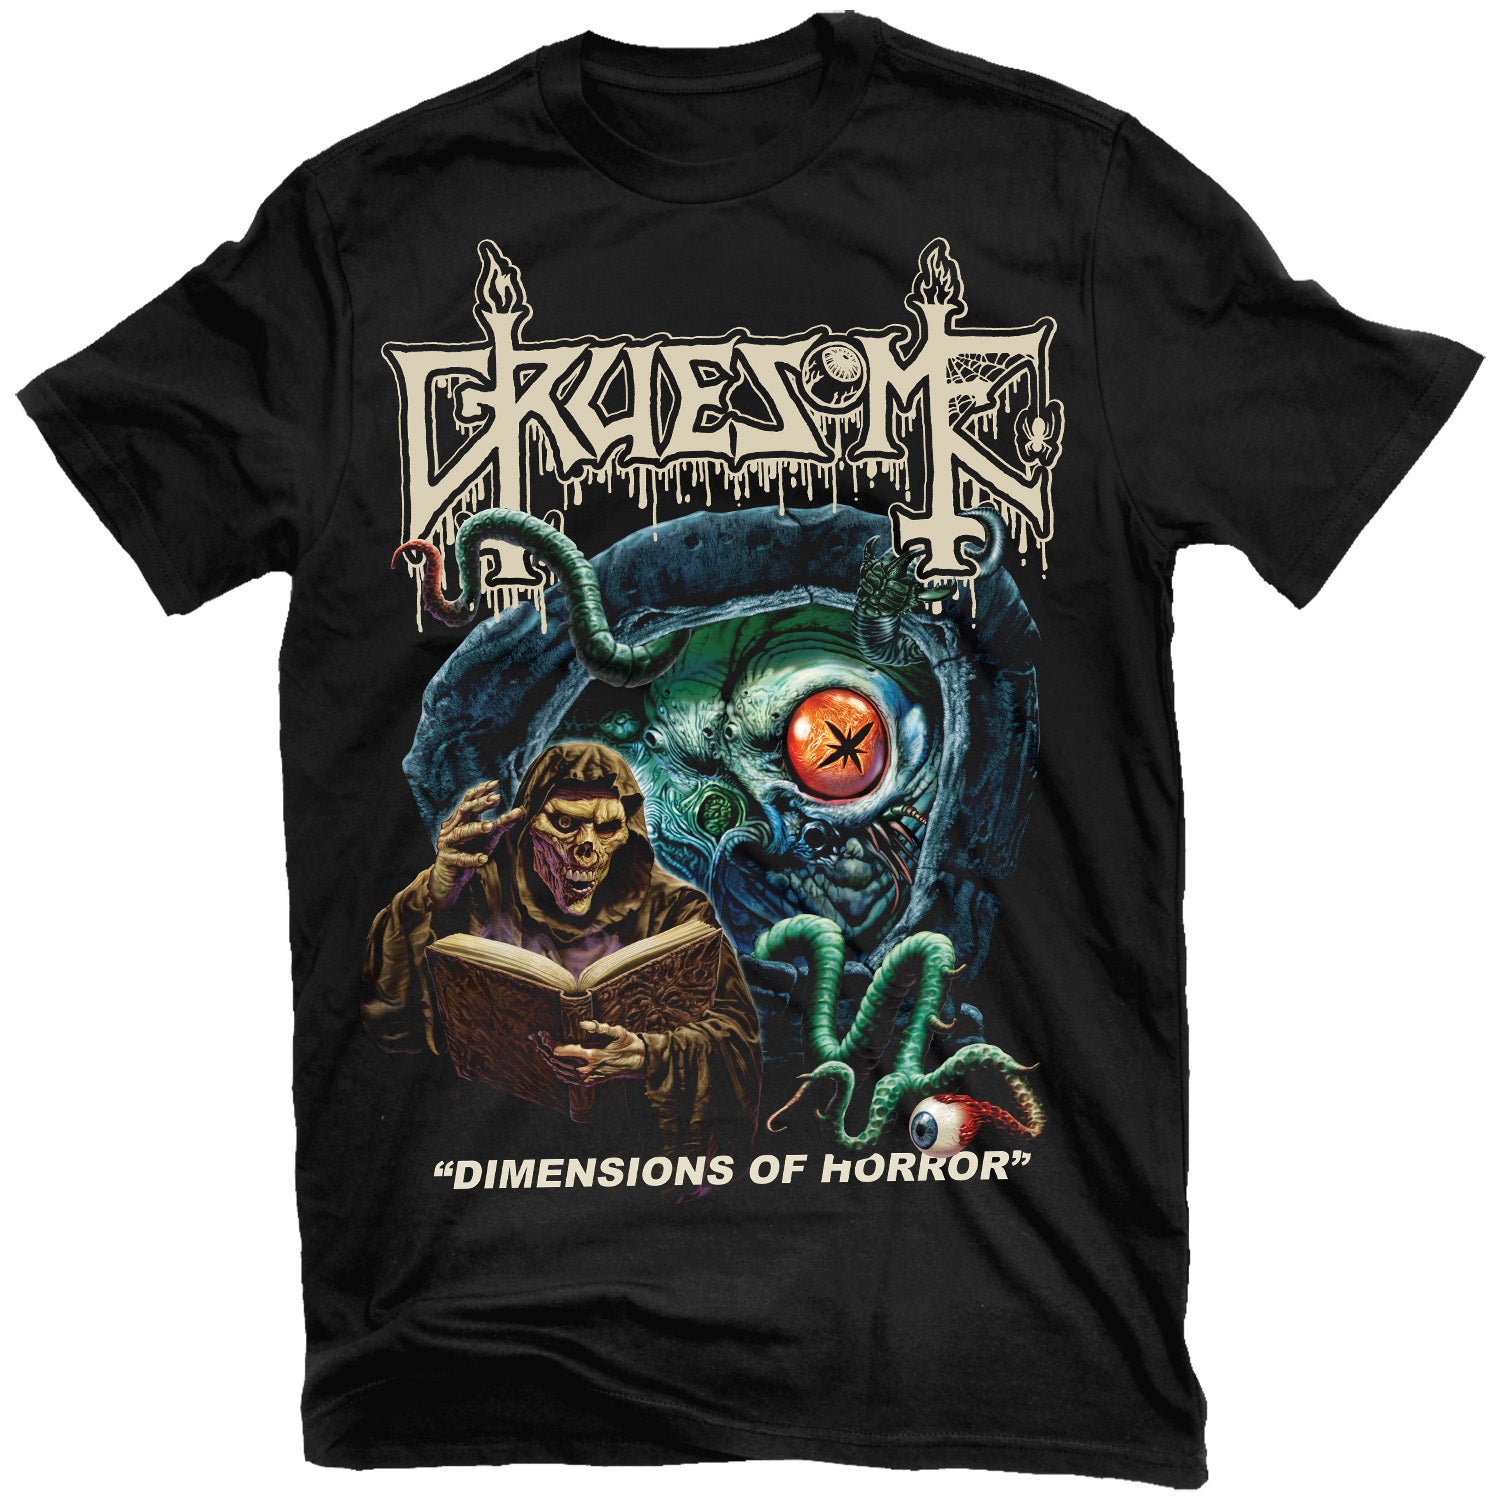 Gruesome "Dimensions of Horror" T-Shirt